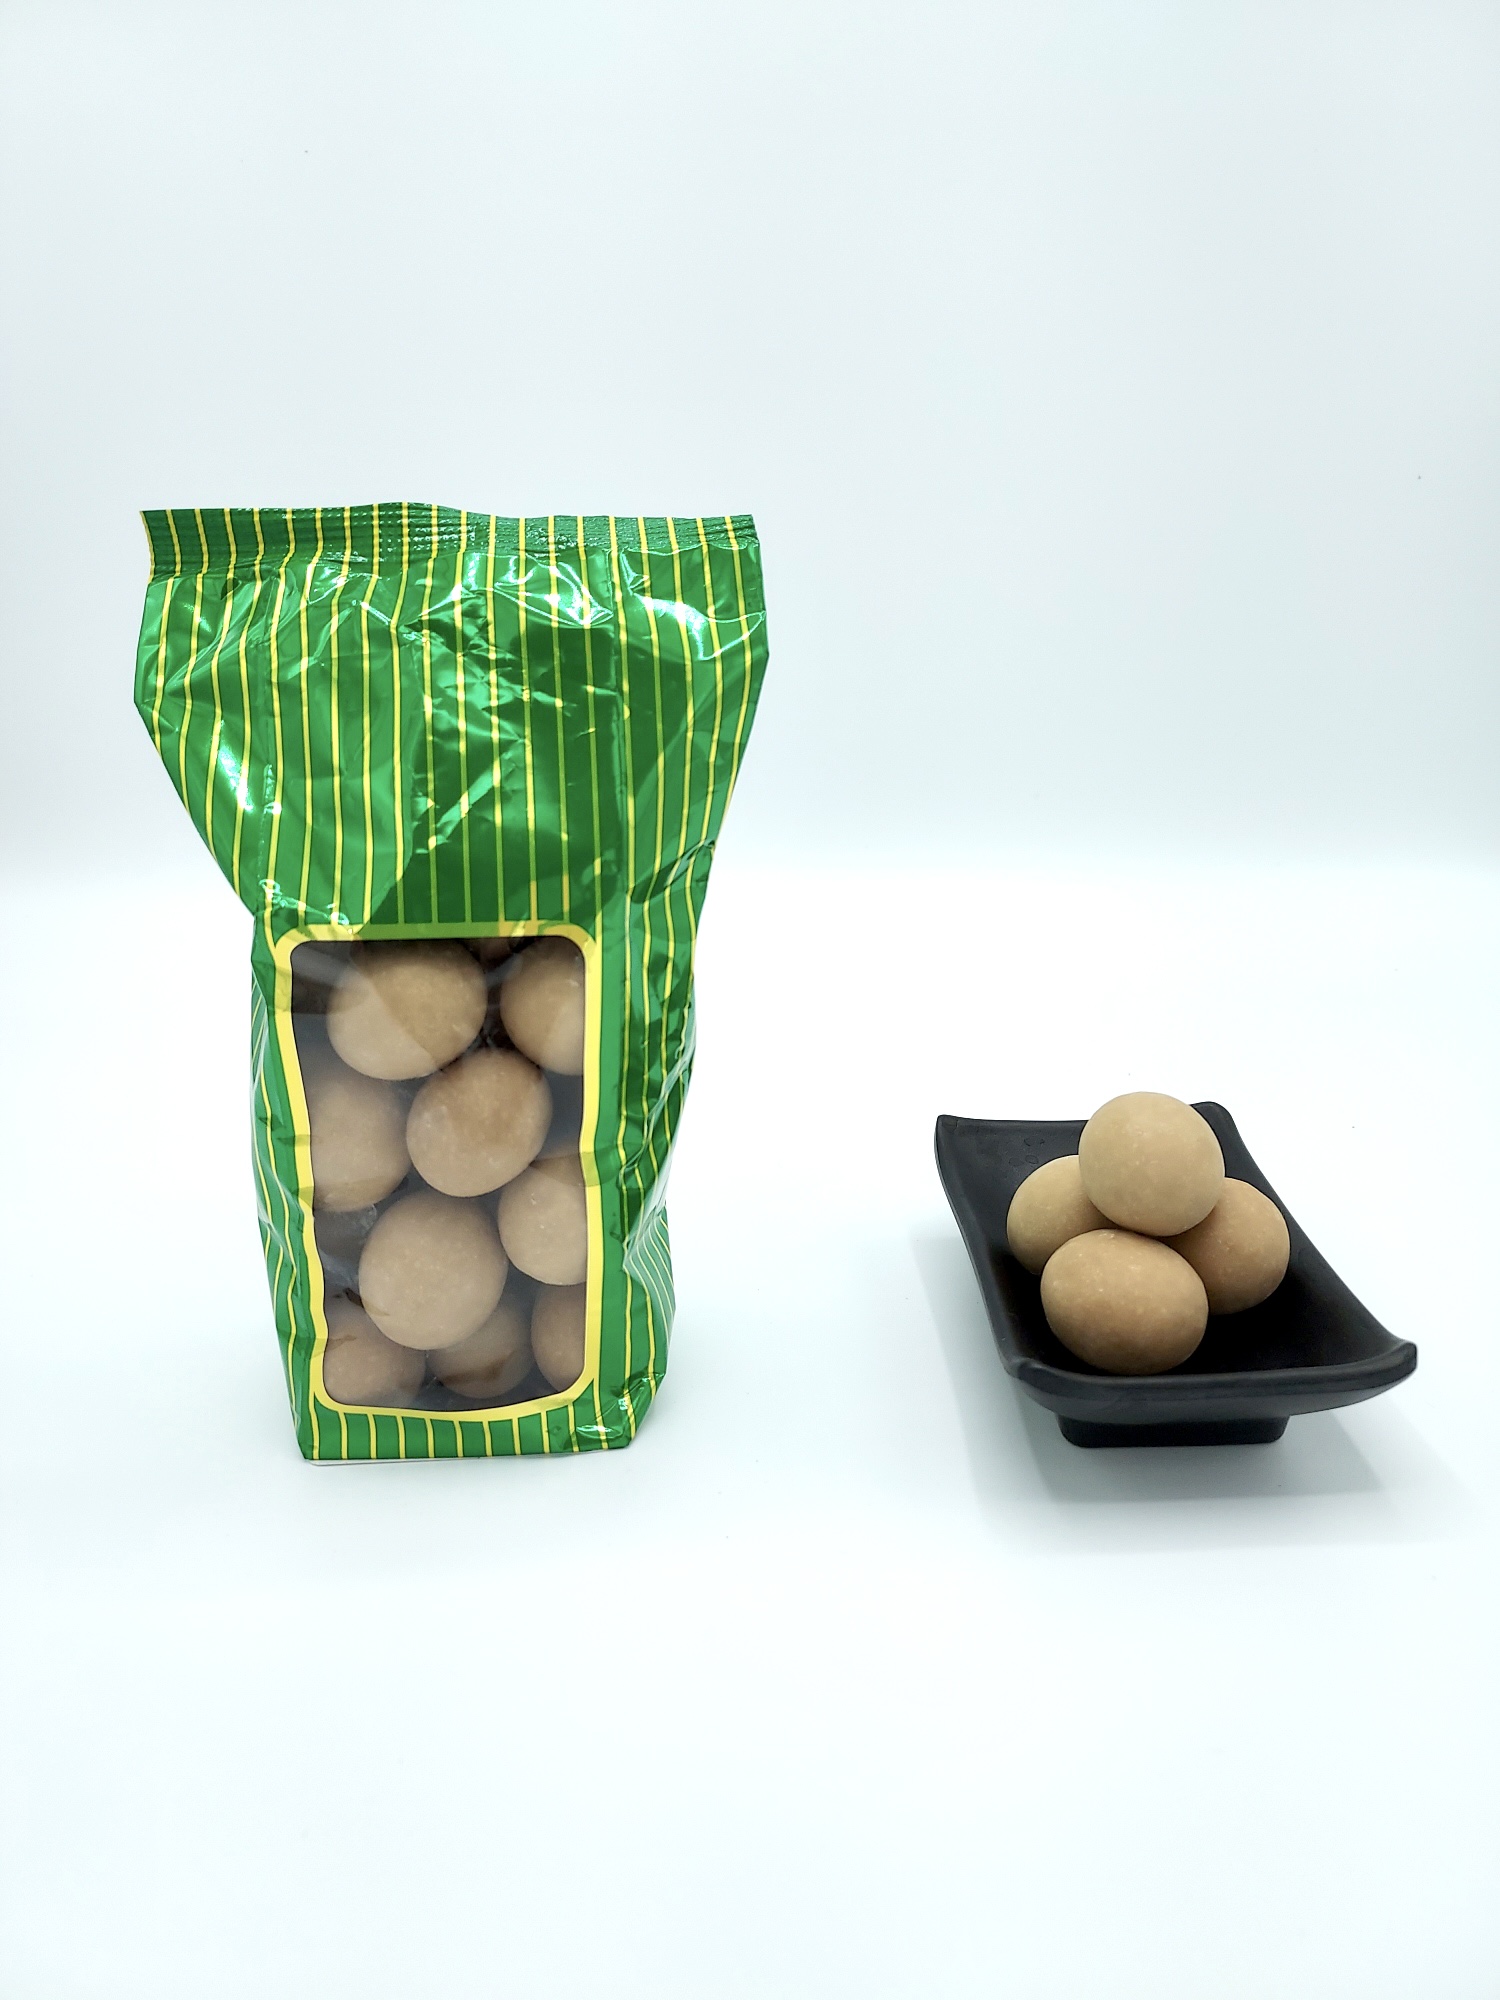 Product Image for Coconut Cream Chocolate Covered Macadamia Nuts